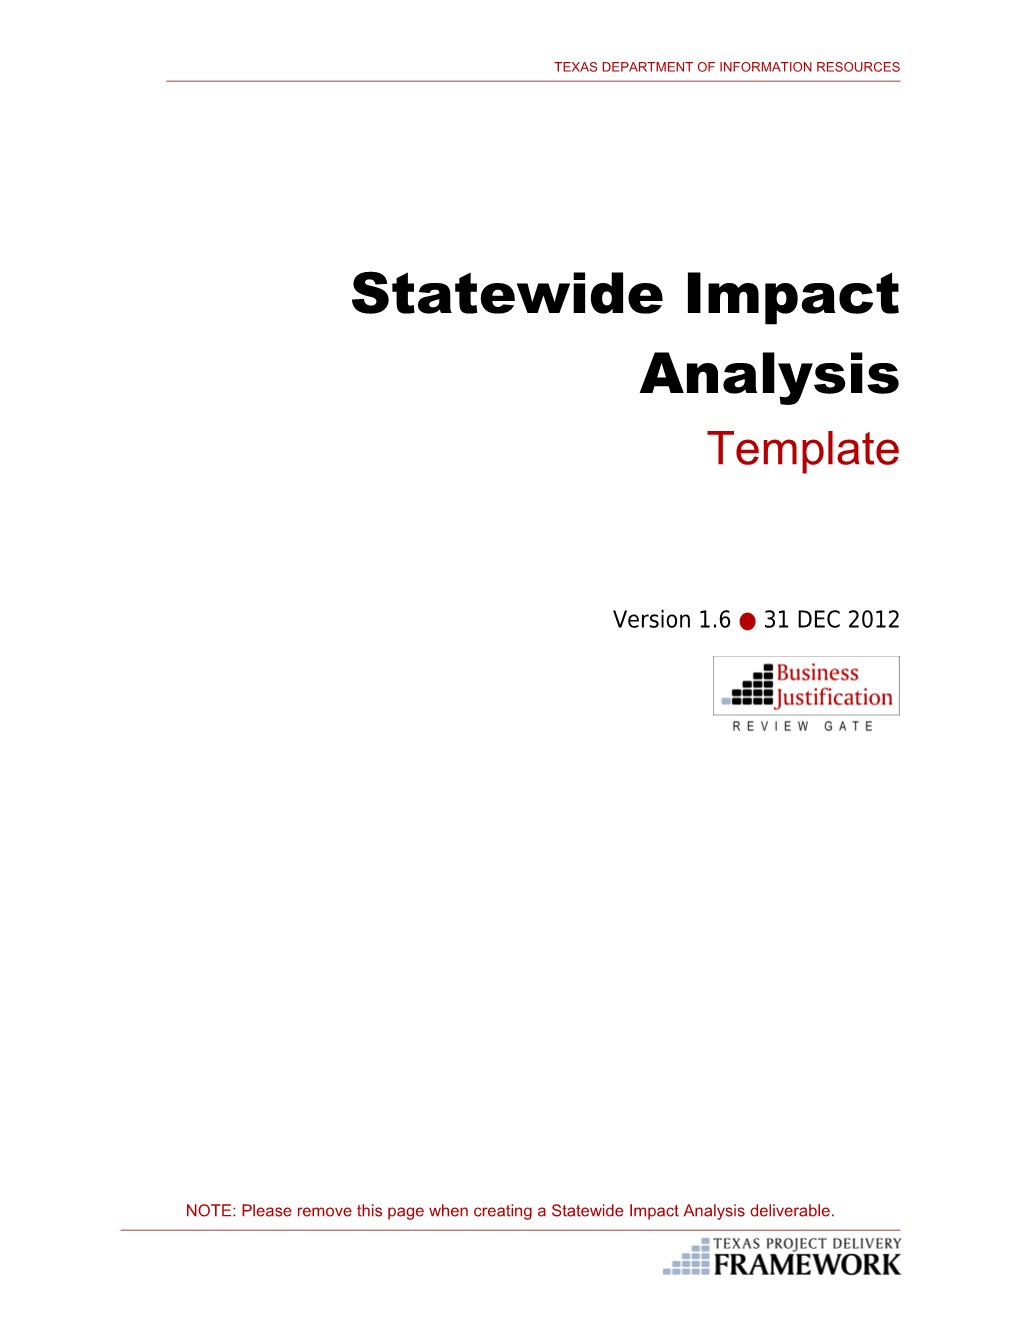 Statewide Impact Analysis Template